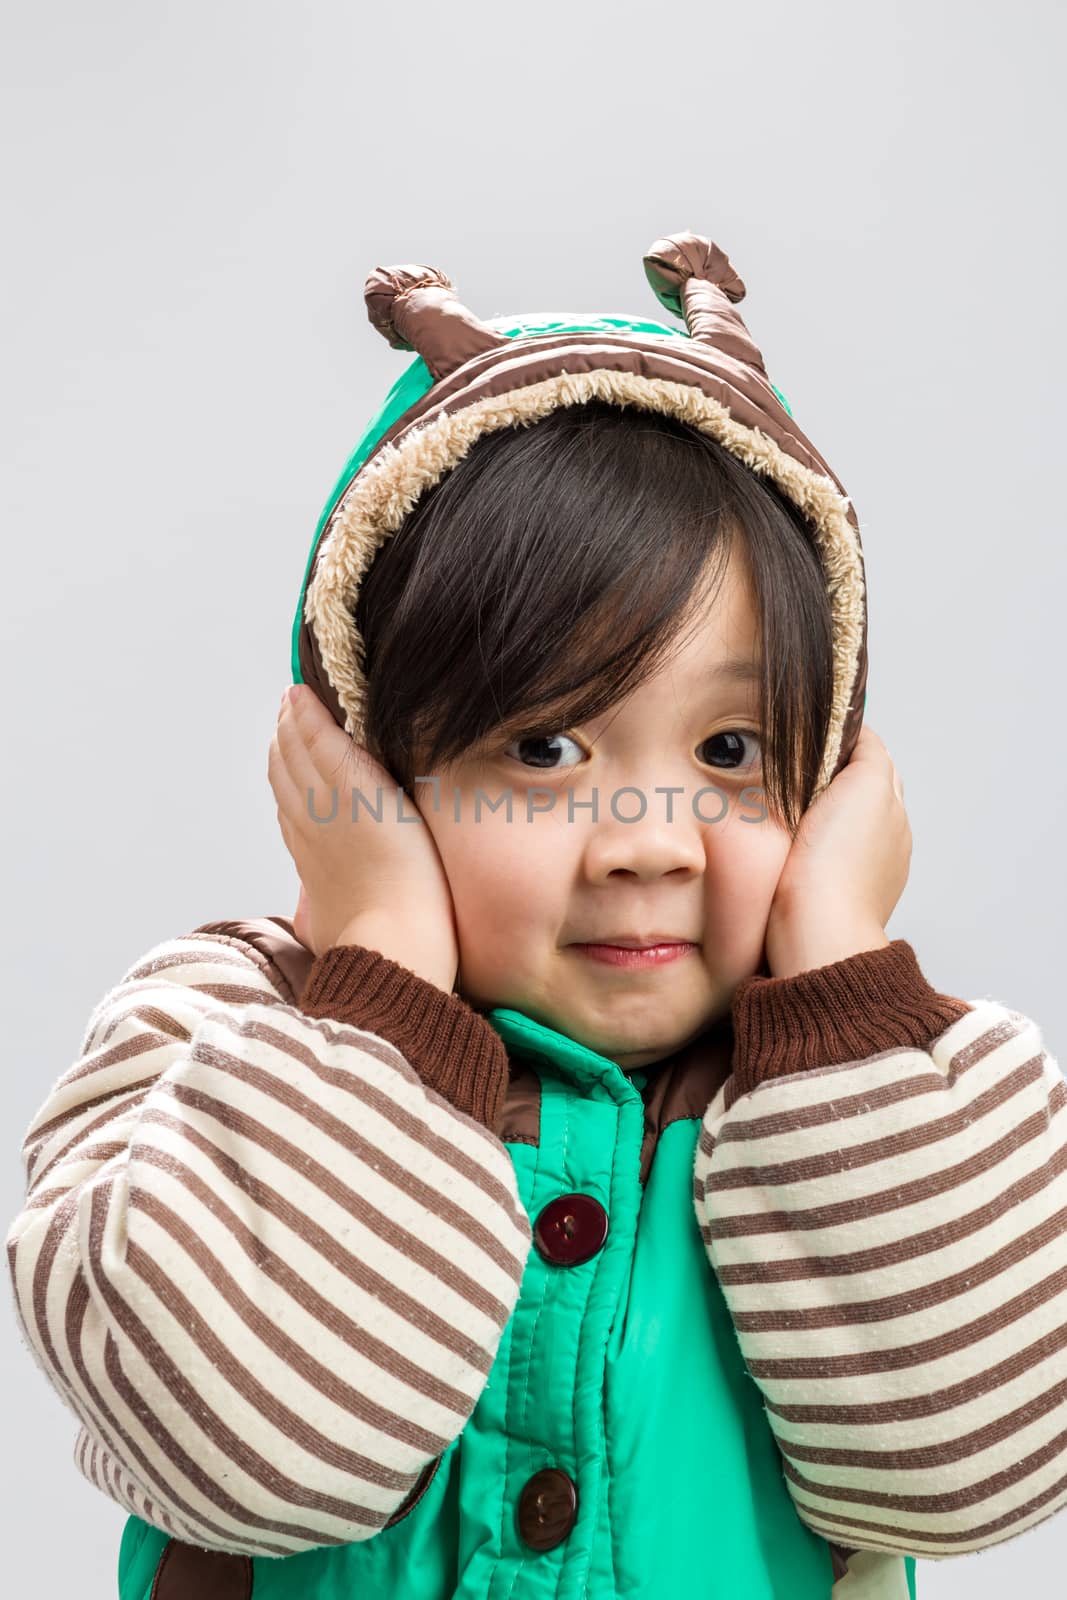 Cute Asian girl shivering in coat, studio isolated white background.